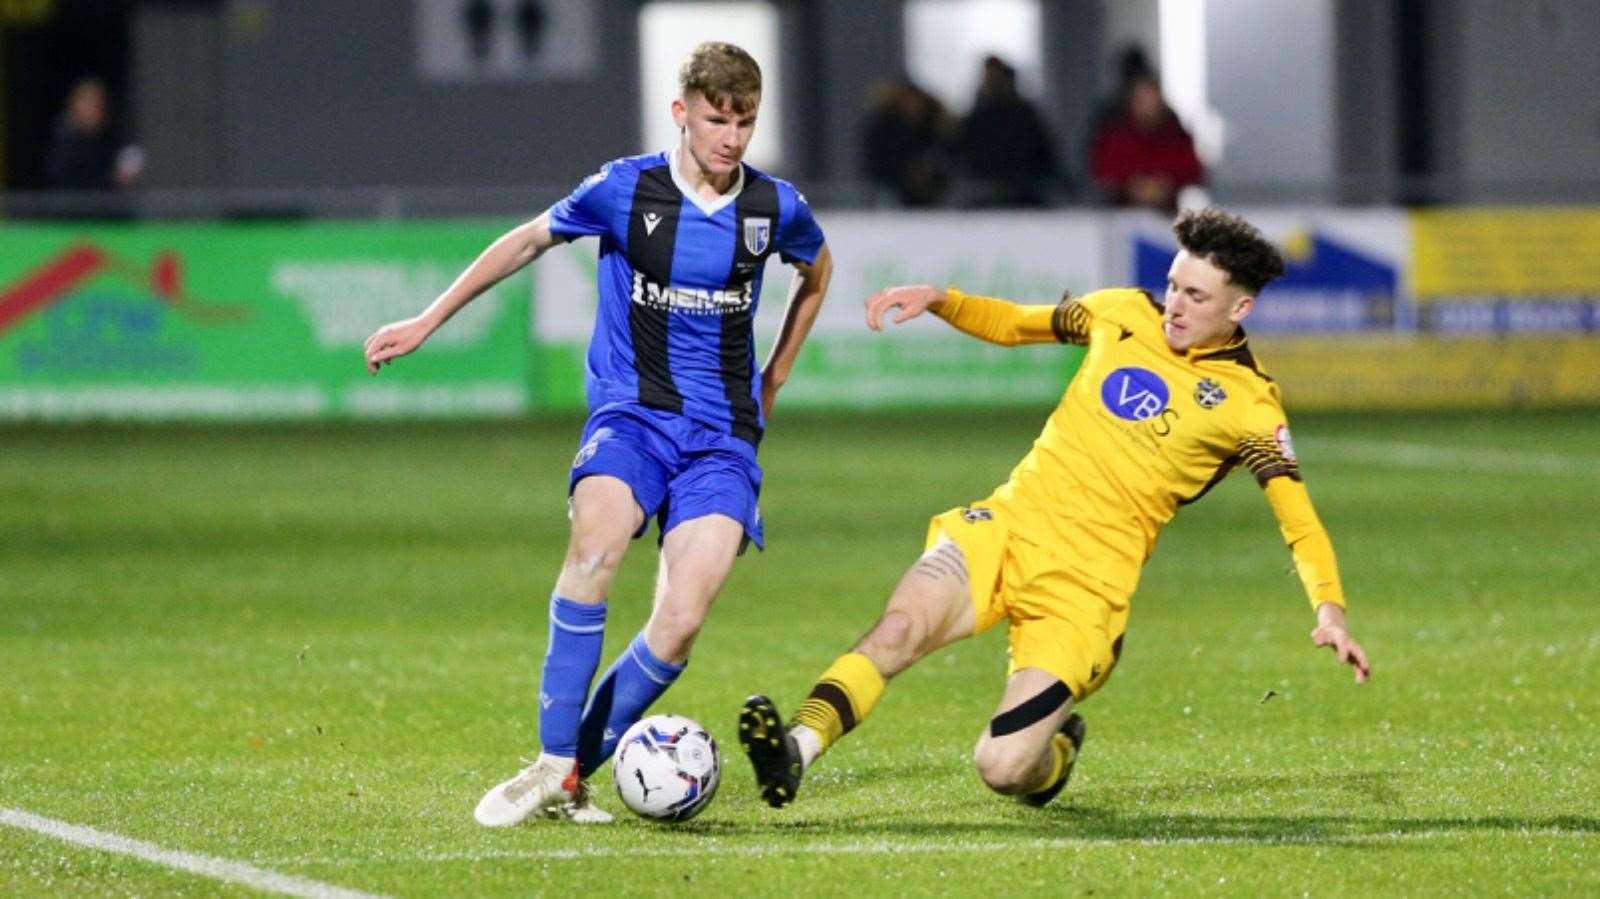 Gillingham up against Sutton United in the FA Youth Cup Picture: Kent Pro Images